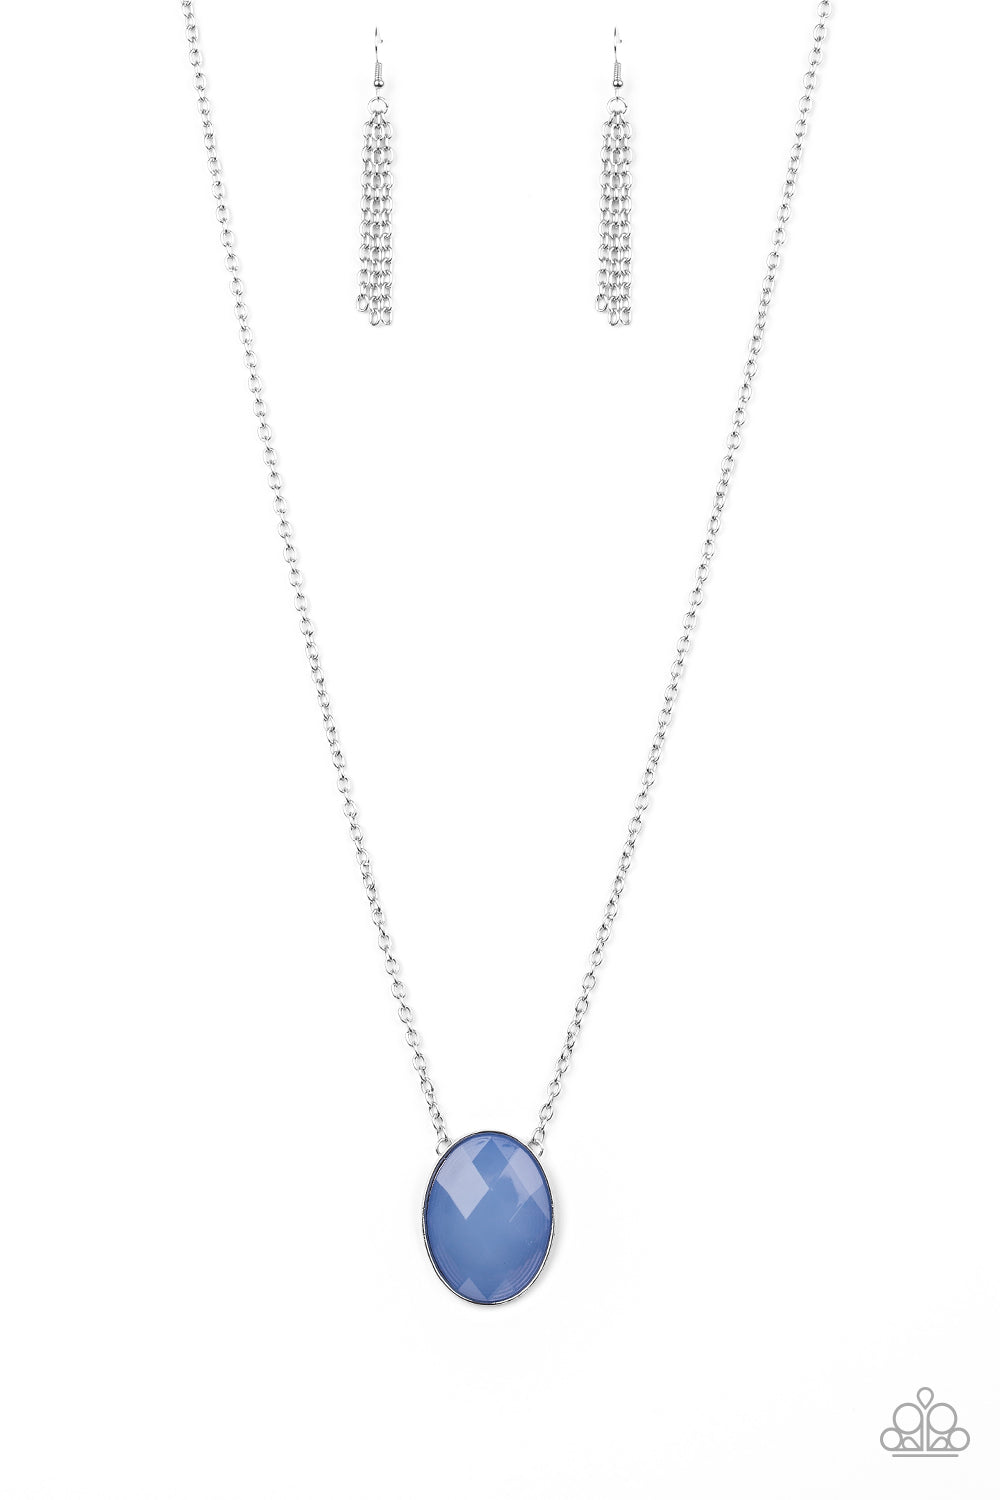 five-dollar-jewelry-intensely-illuminated-blue-necklace-paparazzi-accessories